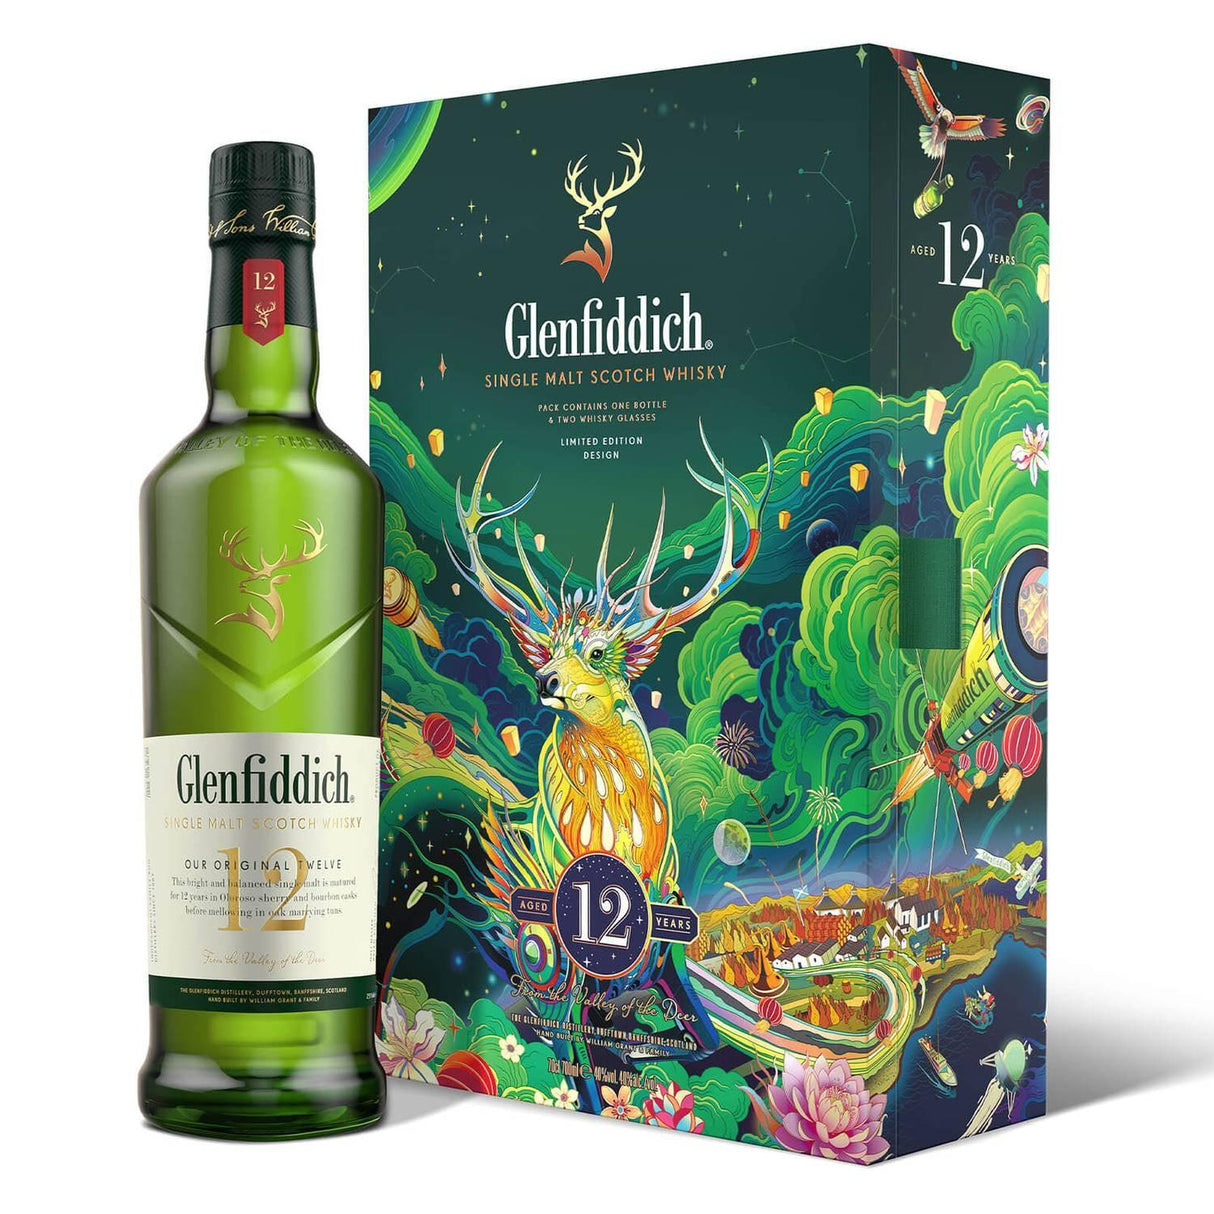 Glenfiddich 12 Year Old "Chinese New Year Limited Edition" Single Malt Scotch Whisky - De Wine Spot | DWS - Drams/Whiskey, Wines, Sake